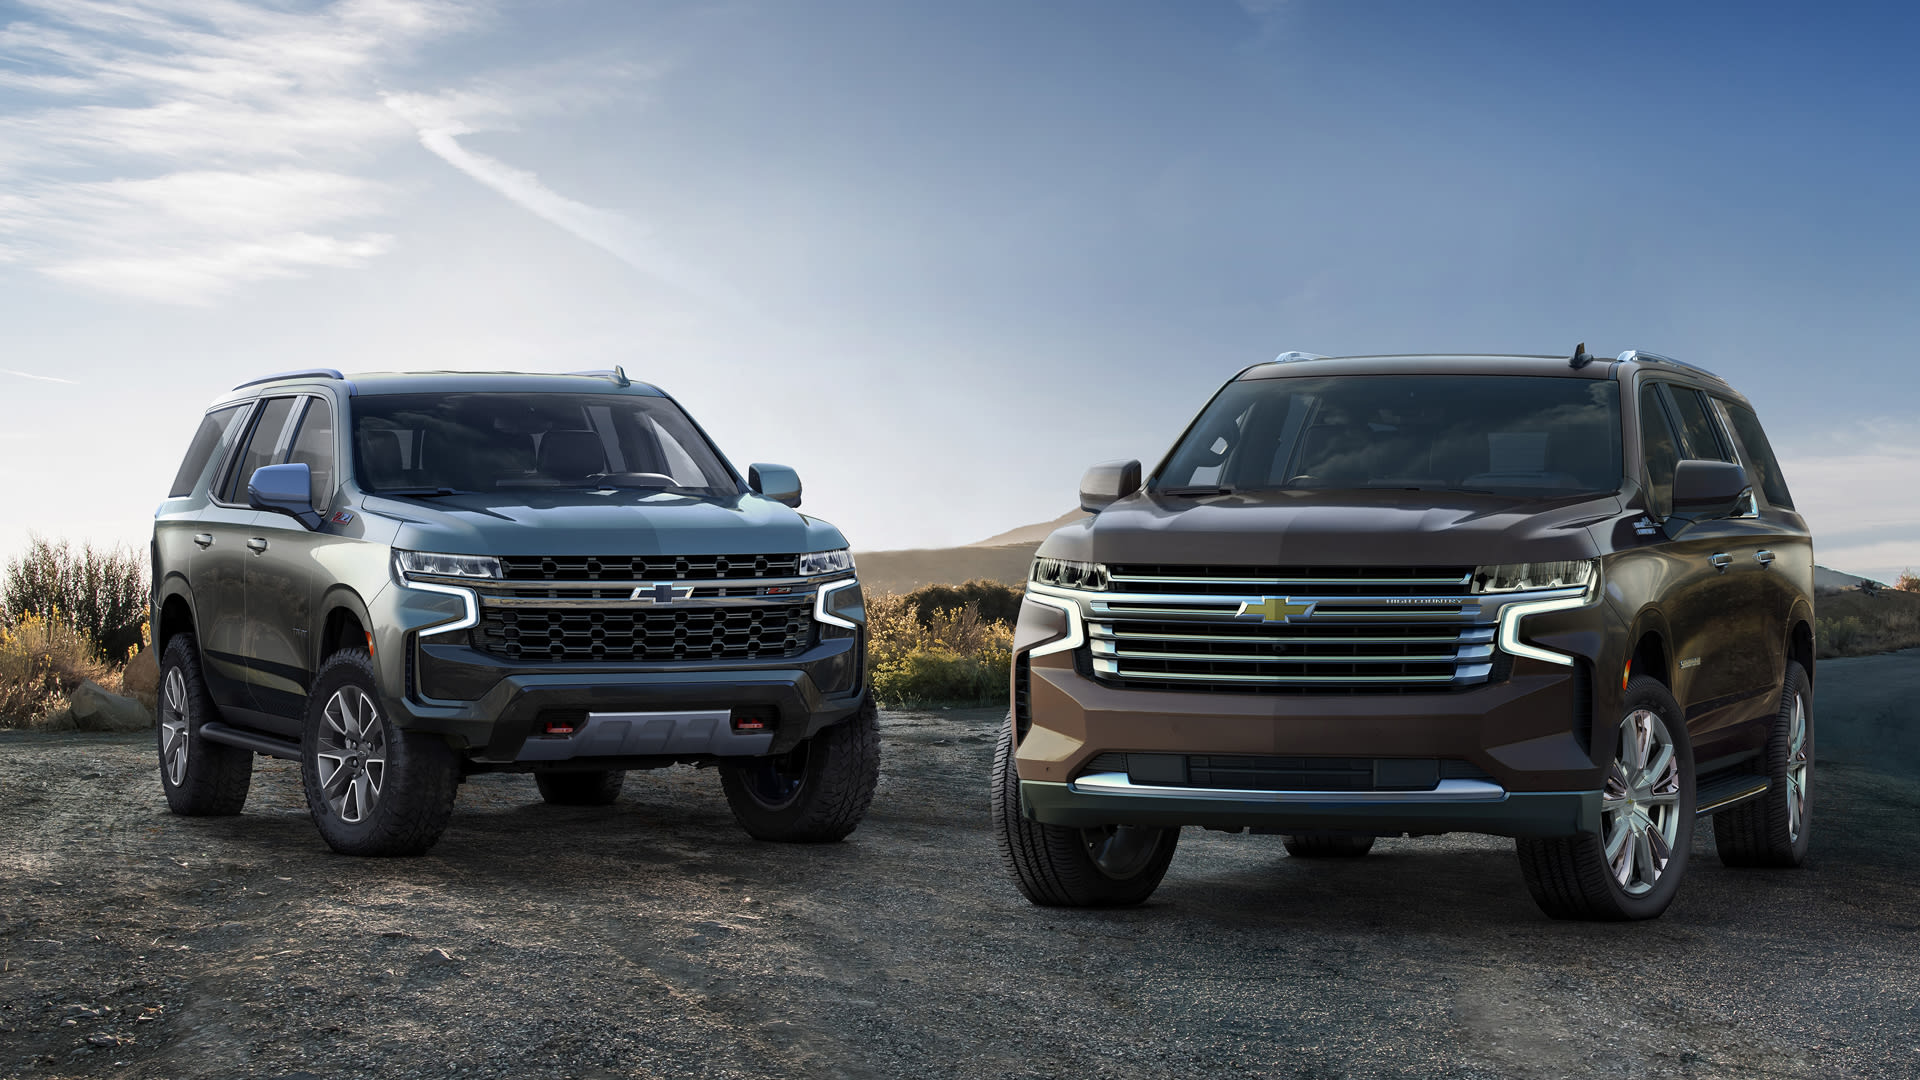 GM’s new 2021 Chevy Suburban SUVs might actually be bigger than your bedroom